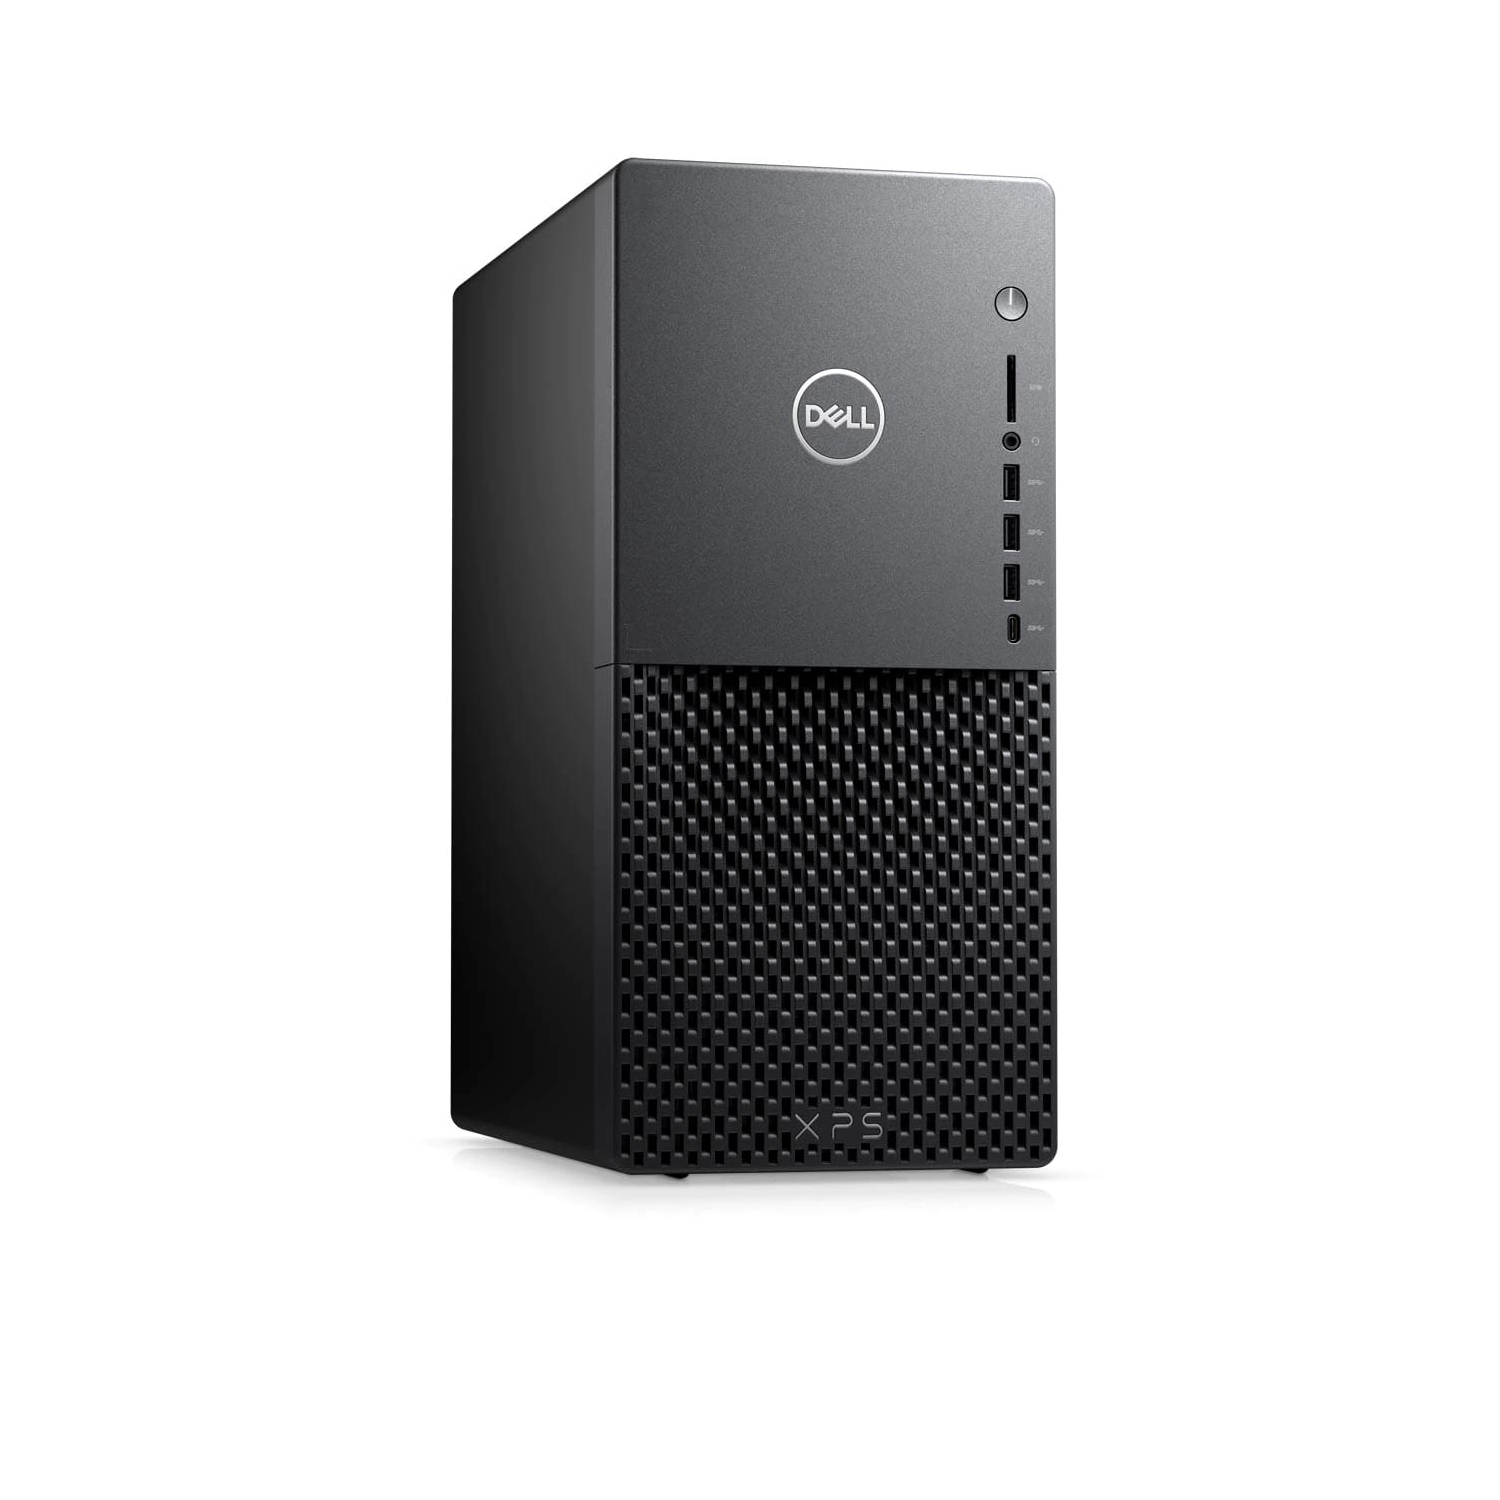 Refurbished (Excellent) - Dell XPS 8940 Desktop (2020) | Core i5 - 512GB SSD - 8GB RAM - RTX 3070 | 6 Cores @ 4.9 GHz - 11th Gen CPU Certified Refurbished